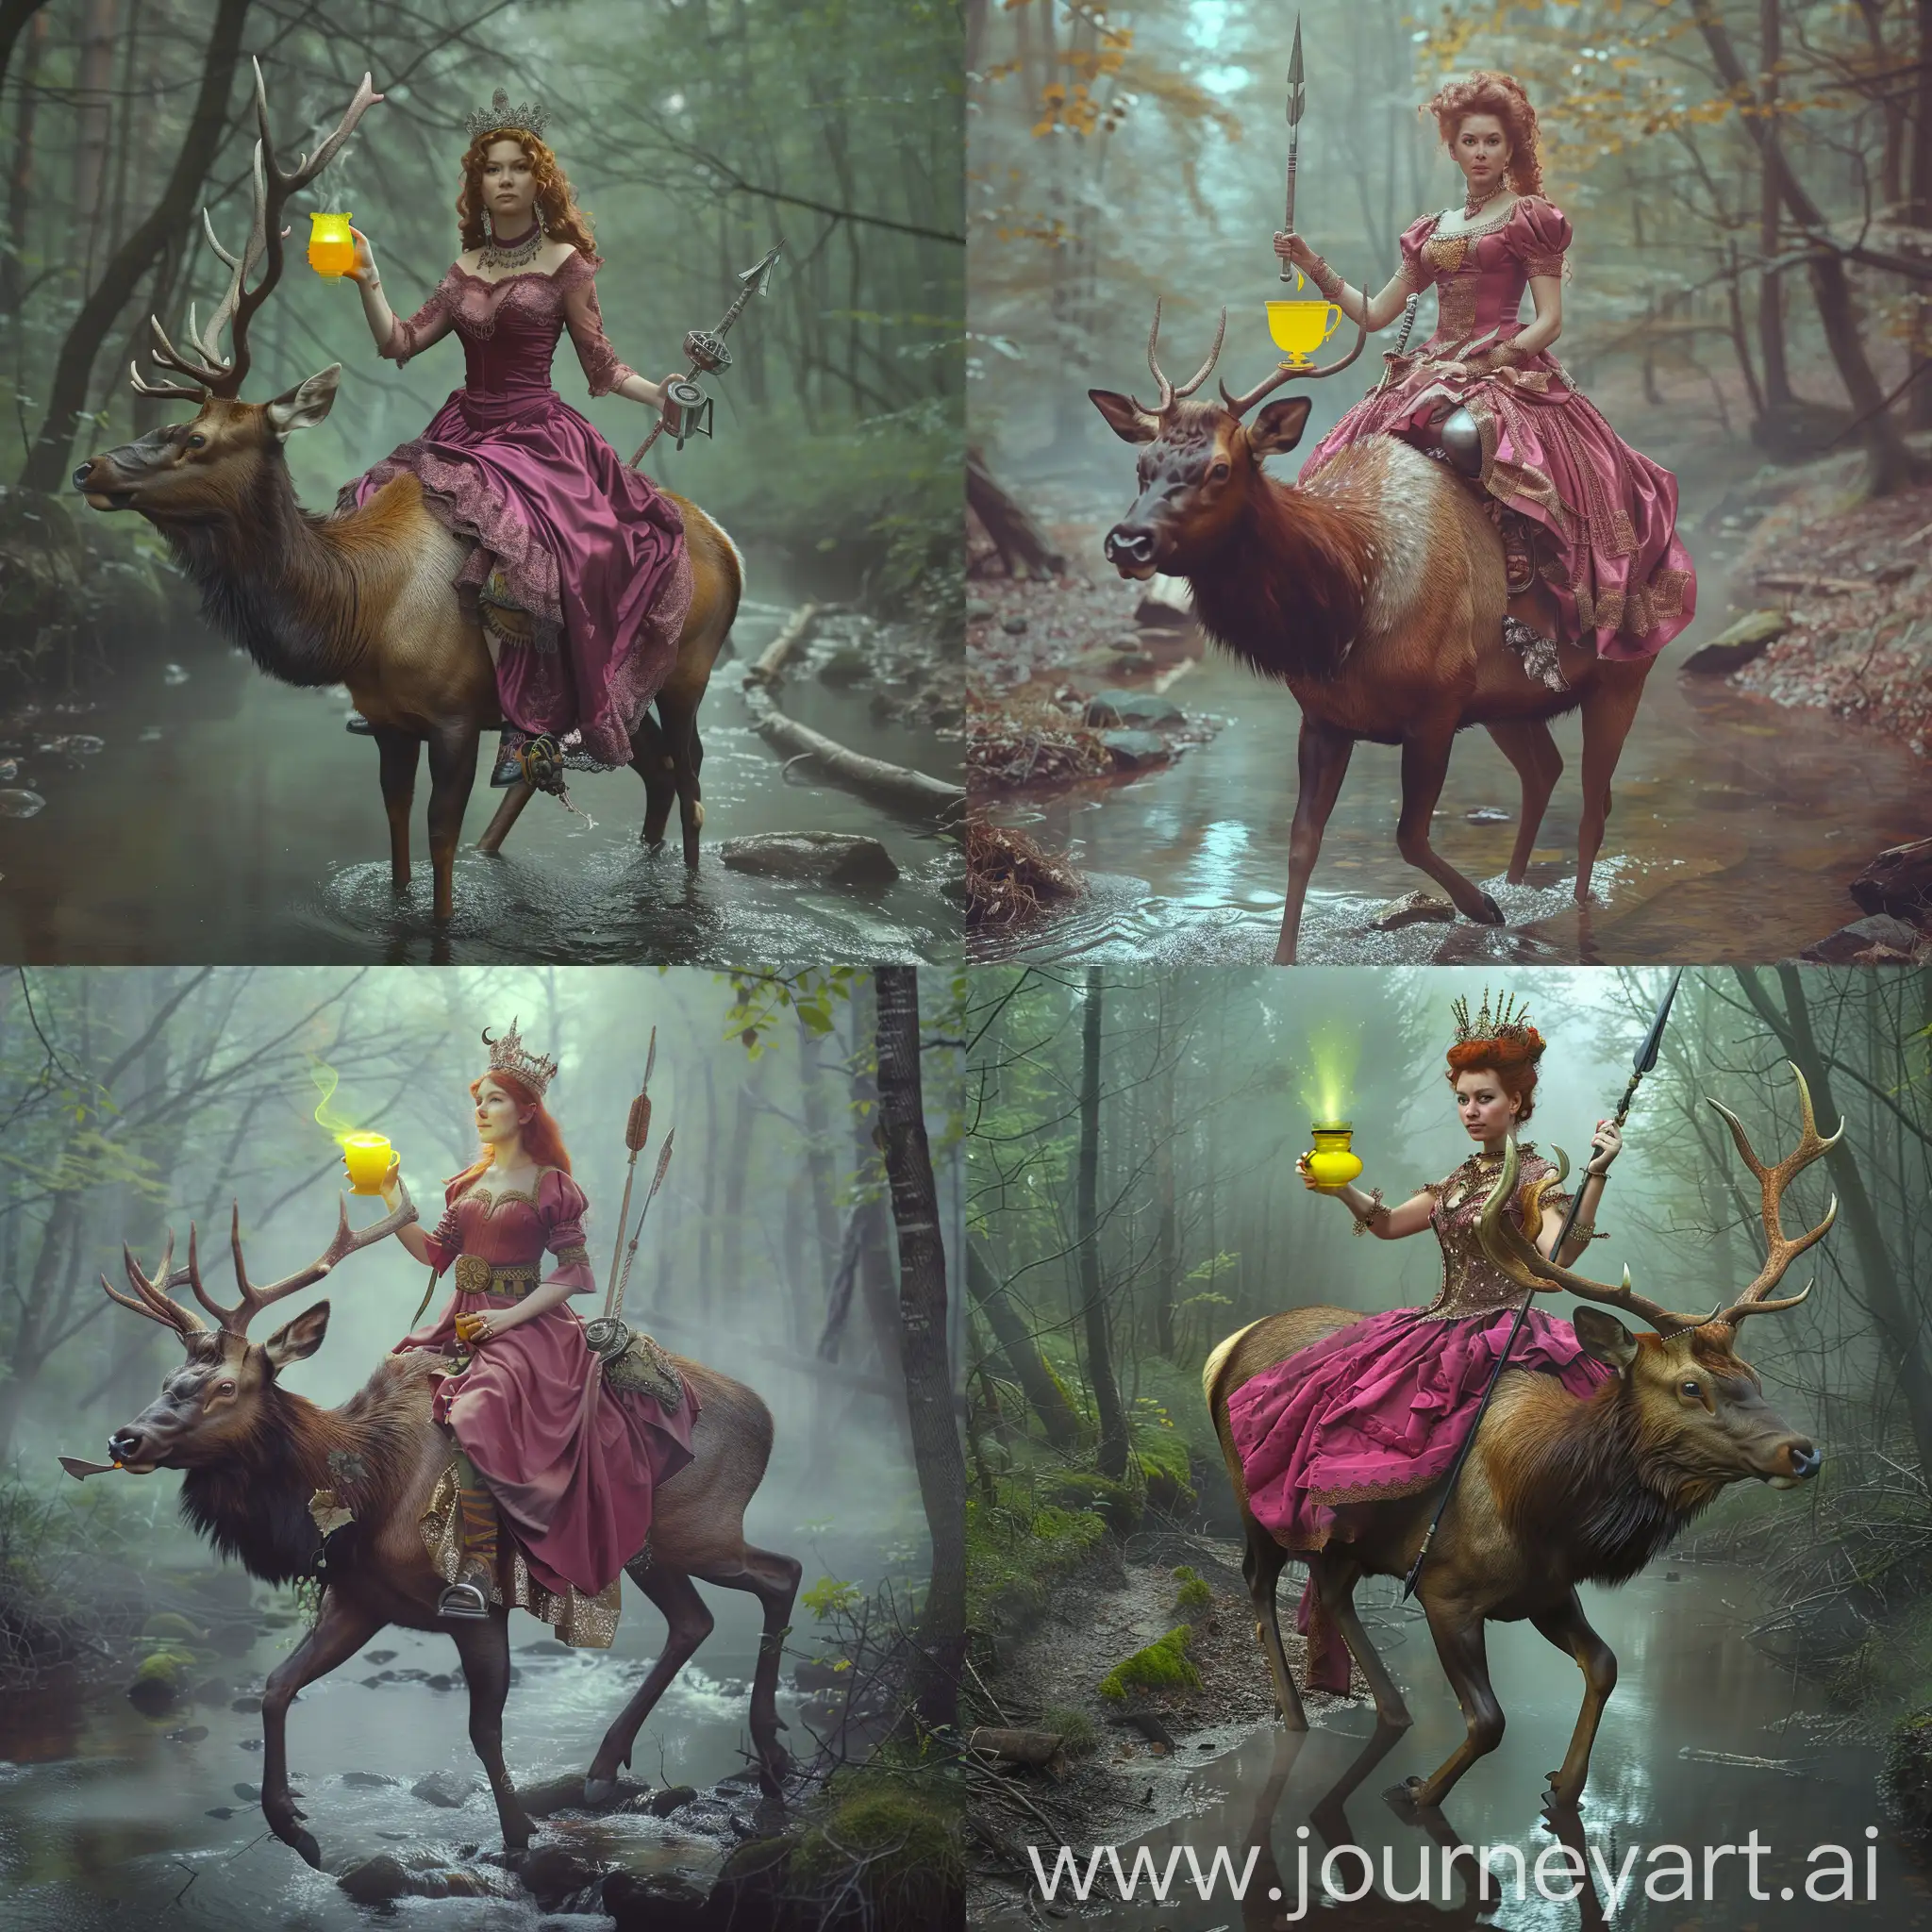 In the foggy Bialowieza primeval forest, a graceful Belarusian lady with stunning auburn hair and donning a fuchsia dress elegantly rides a majestic elk across a gentle creek. She holds a cup of bioluminescent yellow tea in one hand, casting an ethereal glow around her. With her other hand she holds an iron spear. This vivid scene, rendered in a realistic wide photograph, captures the enchanting blend of nature and elegance. The lady's poise and the elk's regal presence are beautifully contrasted against the mystical atmosphere of the forest. The intricate details and exquisite color palette make this image a truly captivating masterpiece.